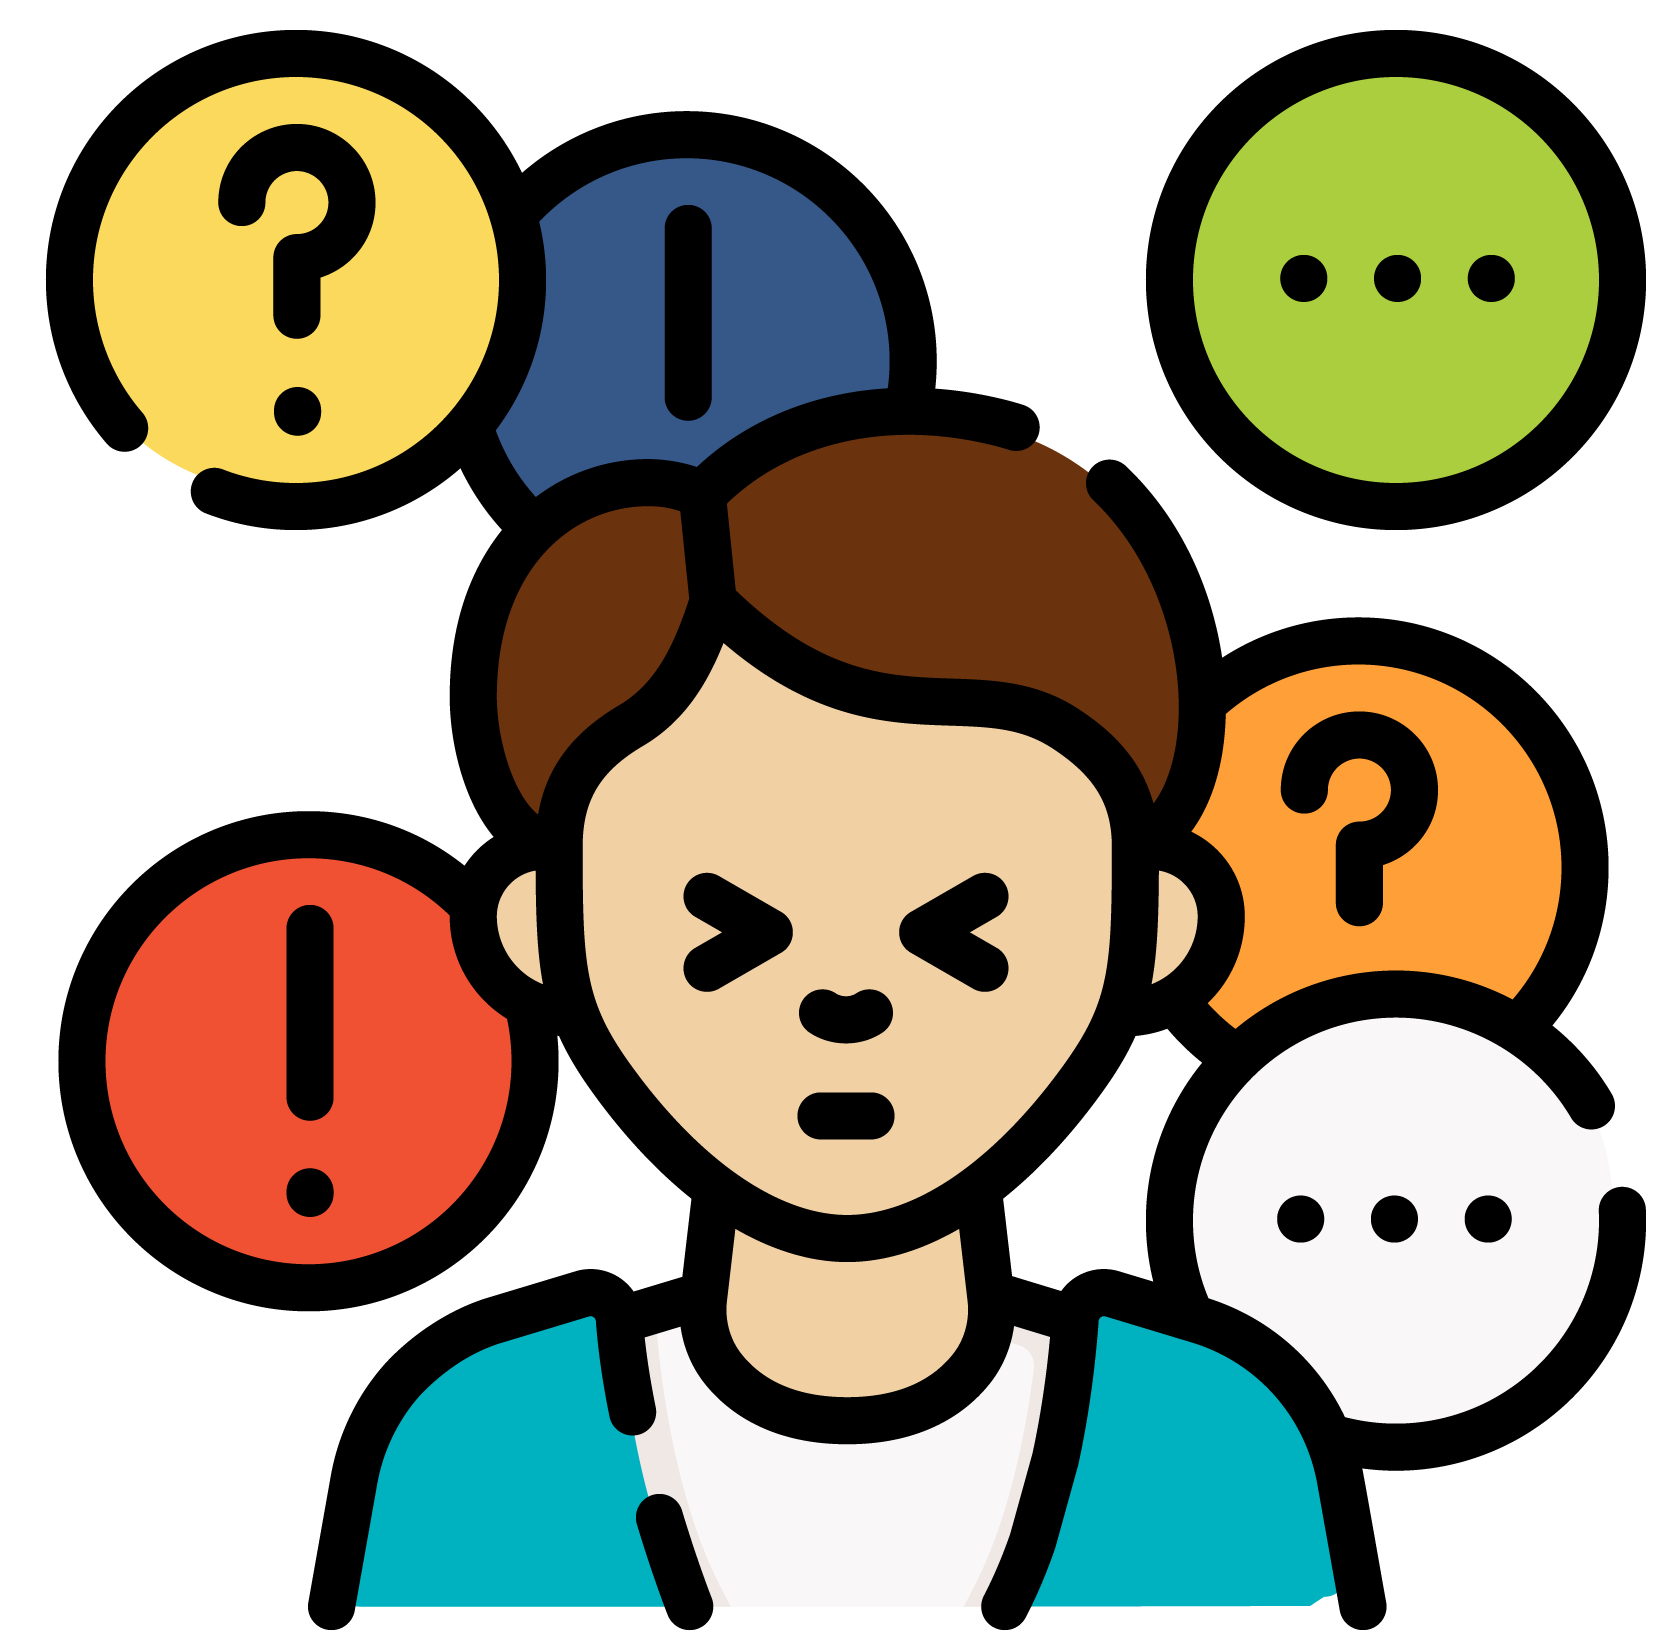 icon of a person squinting surrounded by several different-colored thought and chat-bubbles